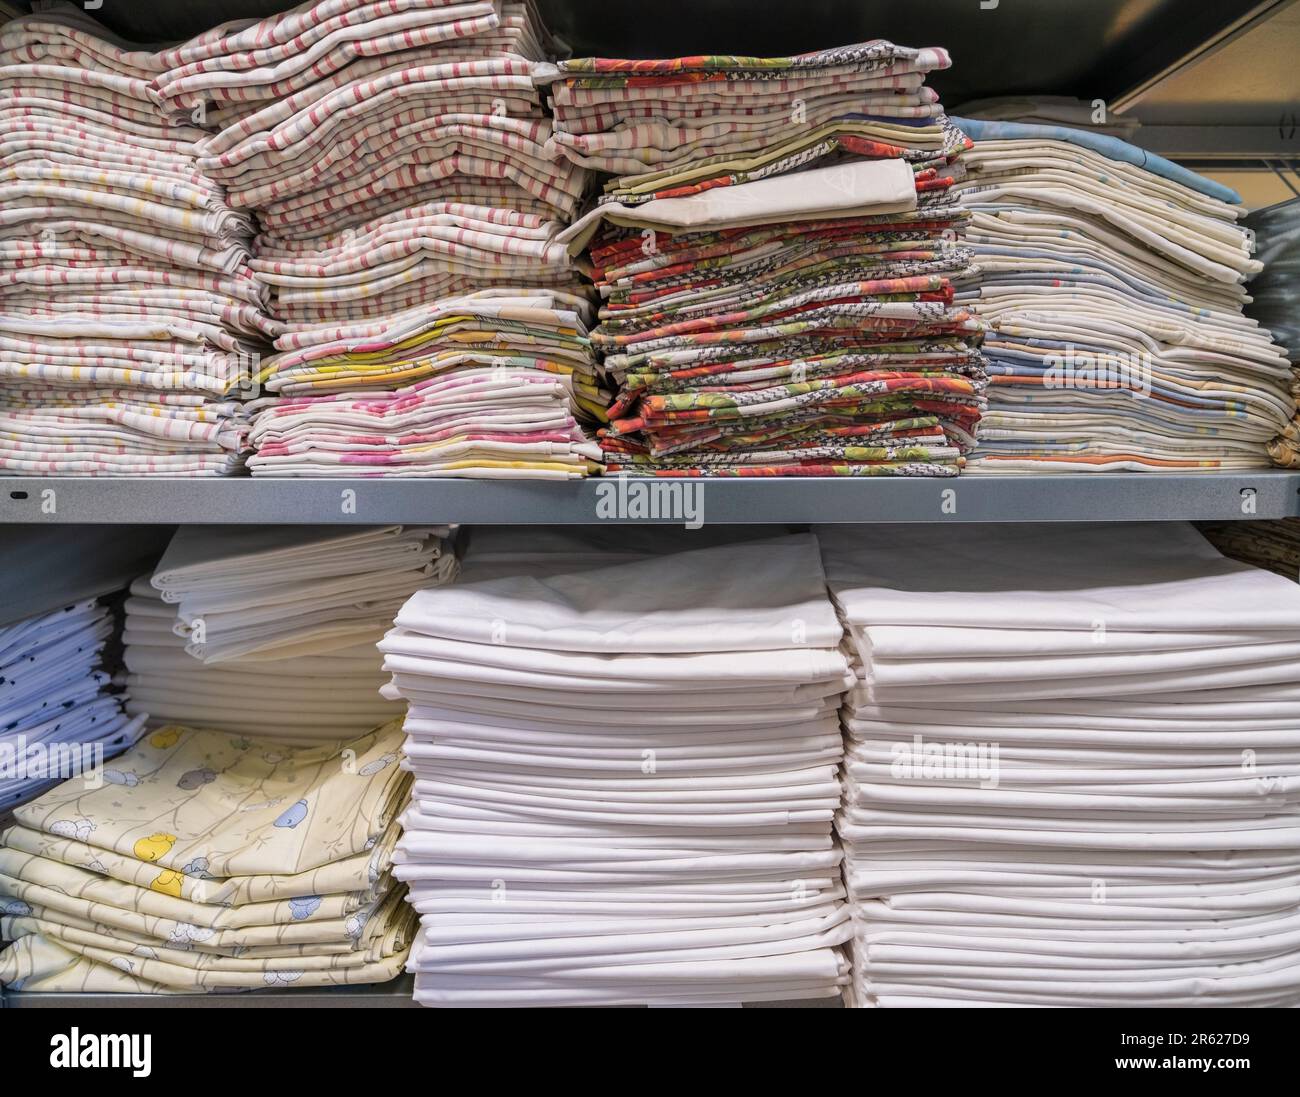 A pile of folded clean sheets or fabrics in an industrial laundry. Services for hotels, hospitals, clinics and companies Stock Photo